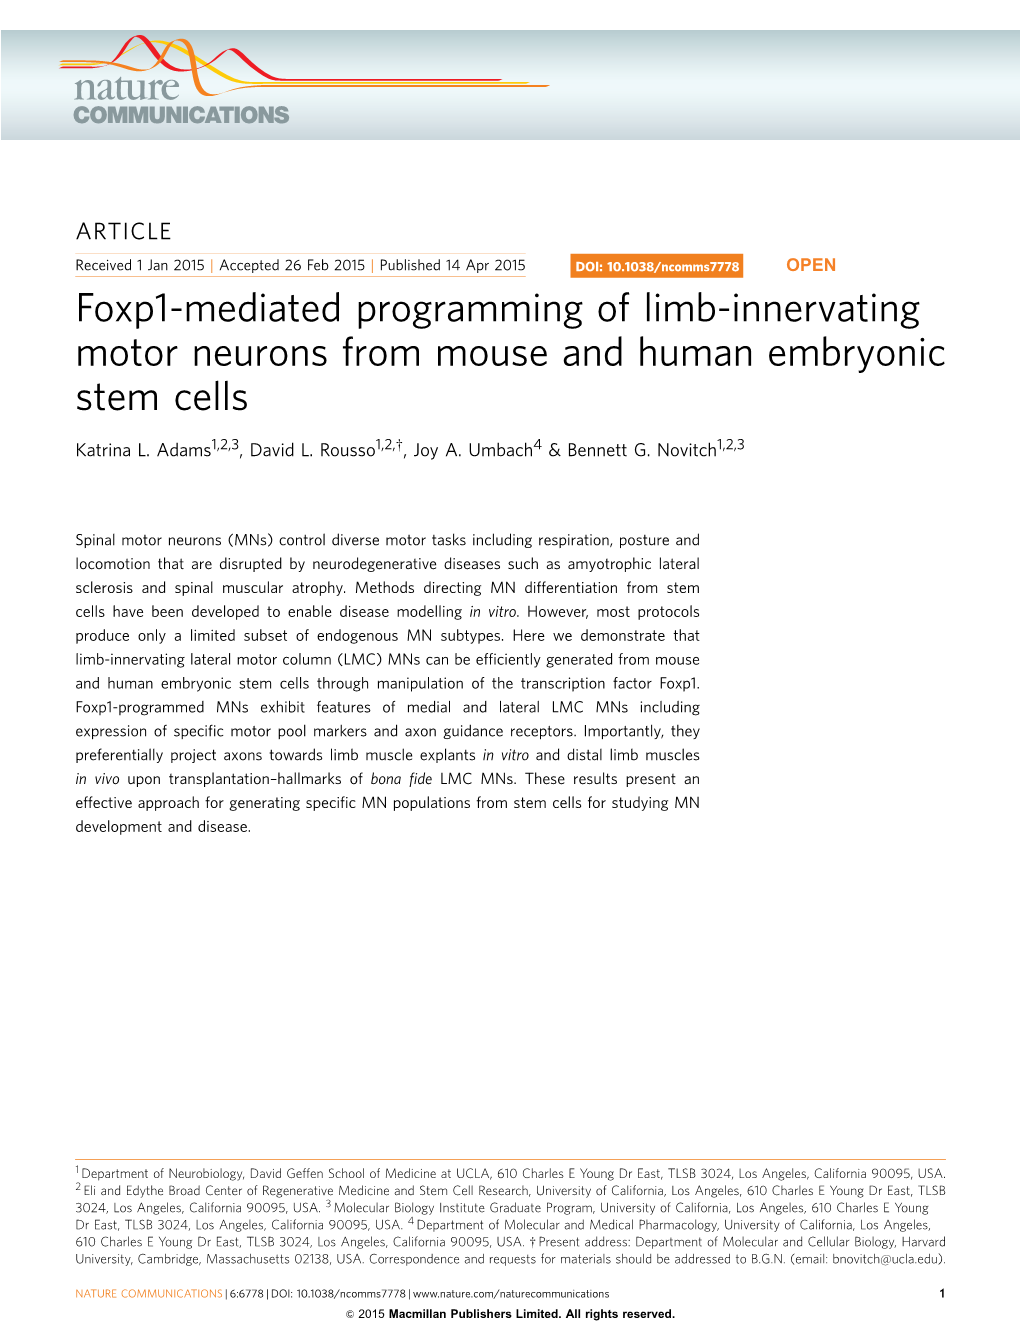 Foxp1-Mediated Programming of Limb-Innervating Motor Neurons from Mouse and Human Embryonic Stem Cells